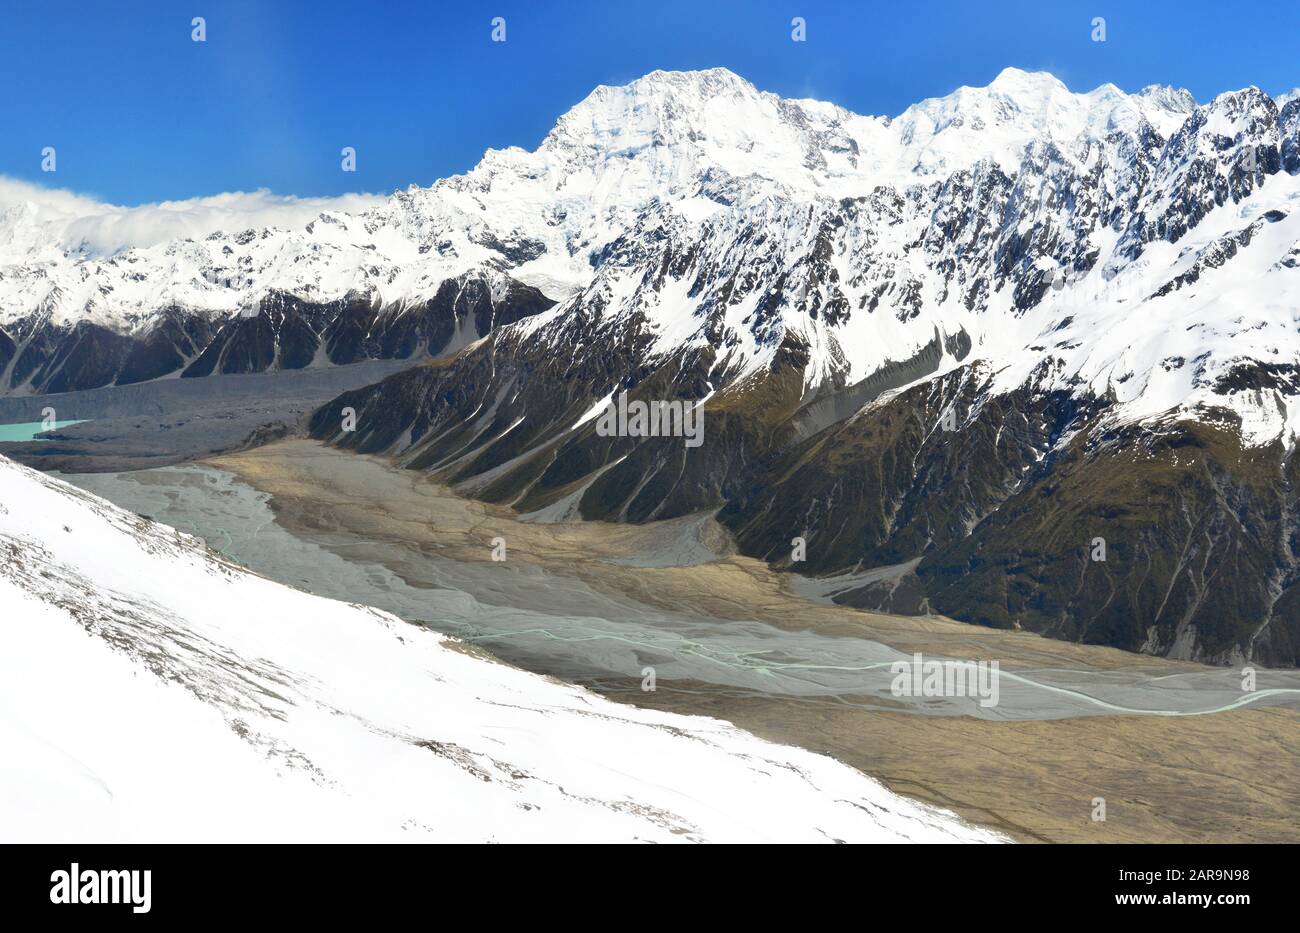 Landscape of Aoraki Mount Cook National Park from helicopter,New Zealand Stock Photo